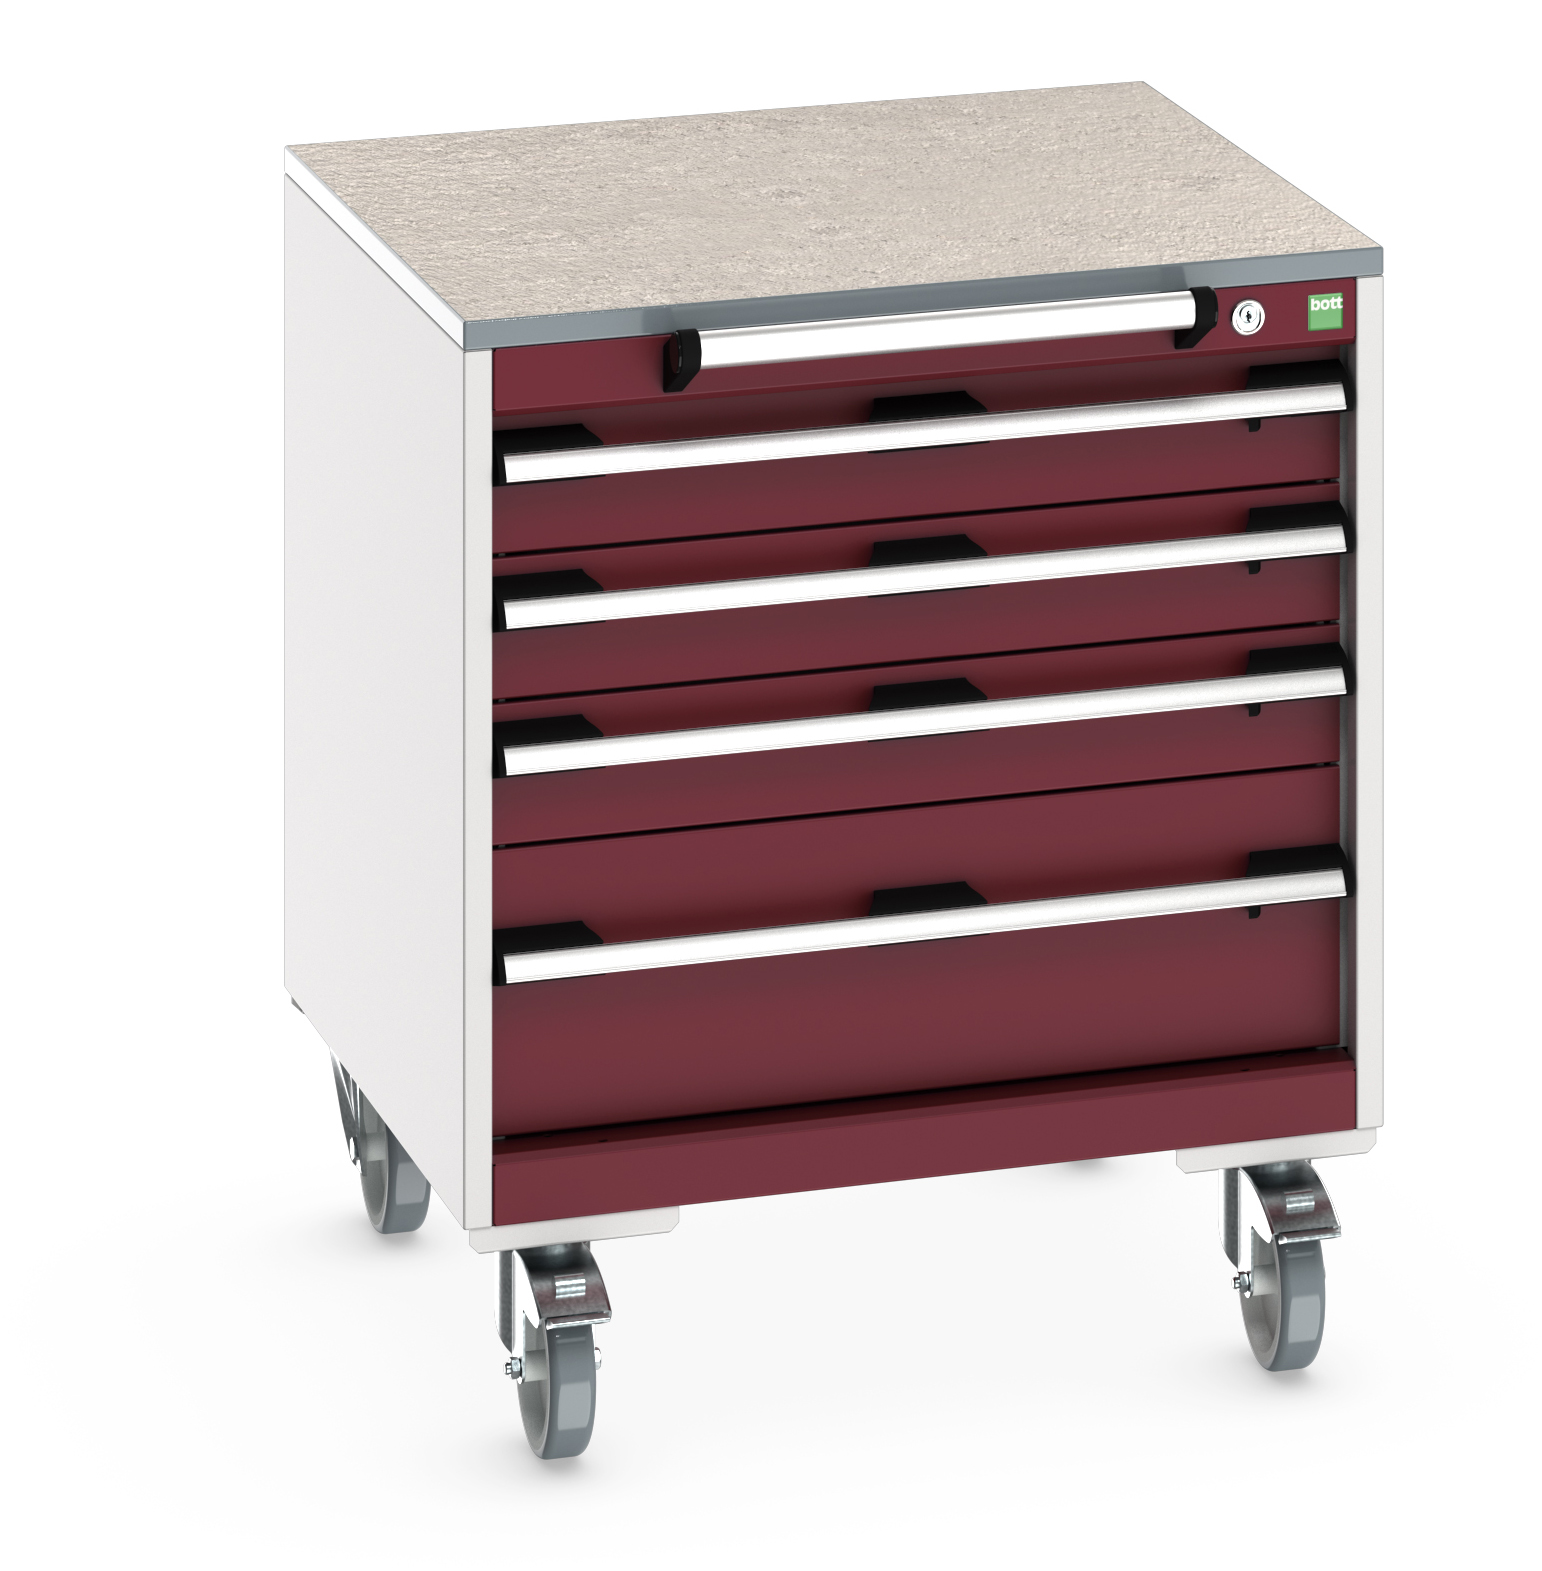 Bott Cubio Mobile Drawer Cabinet With 4 Drawers & Lino Worktop - 40402144.24V